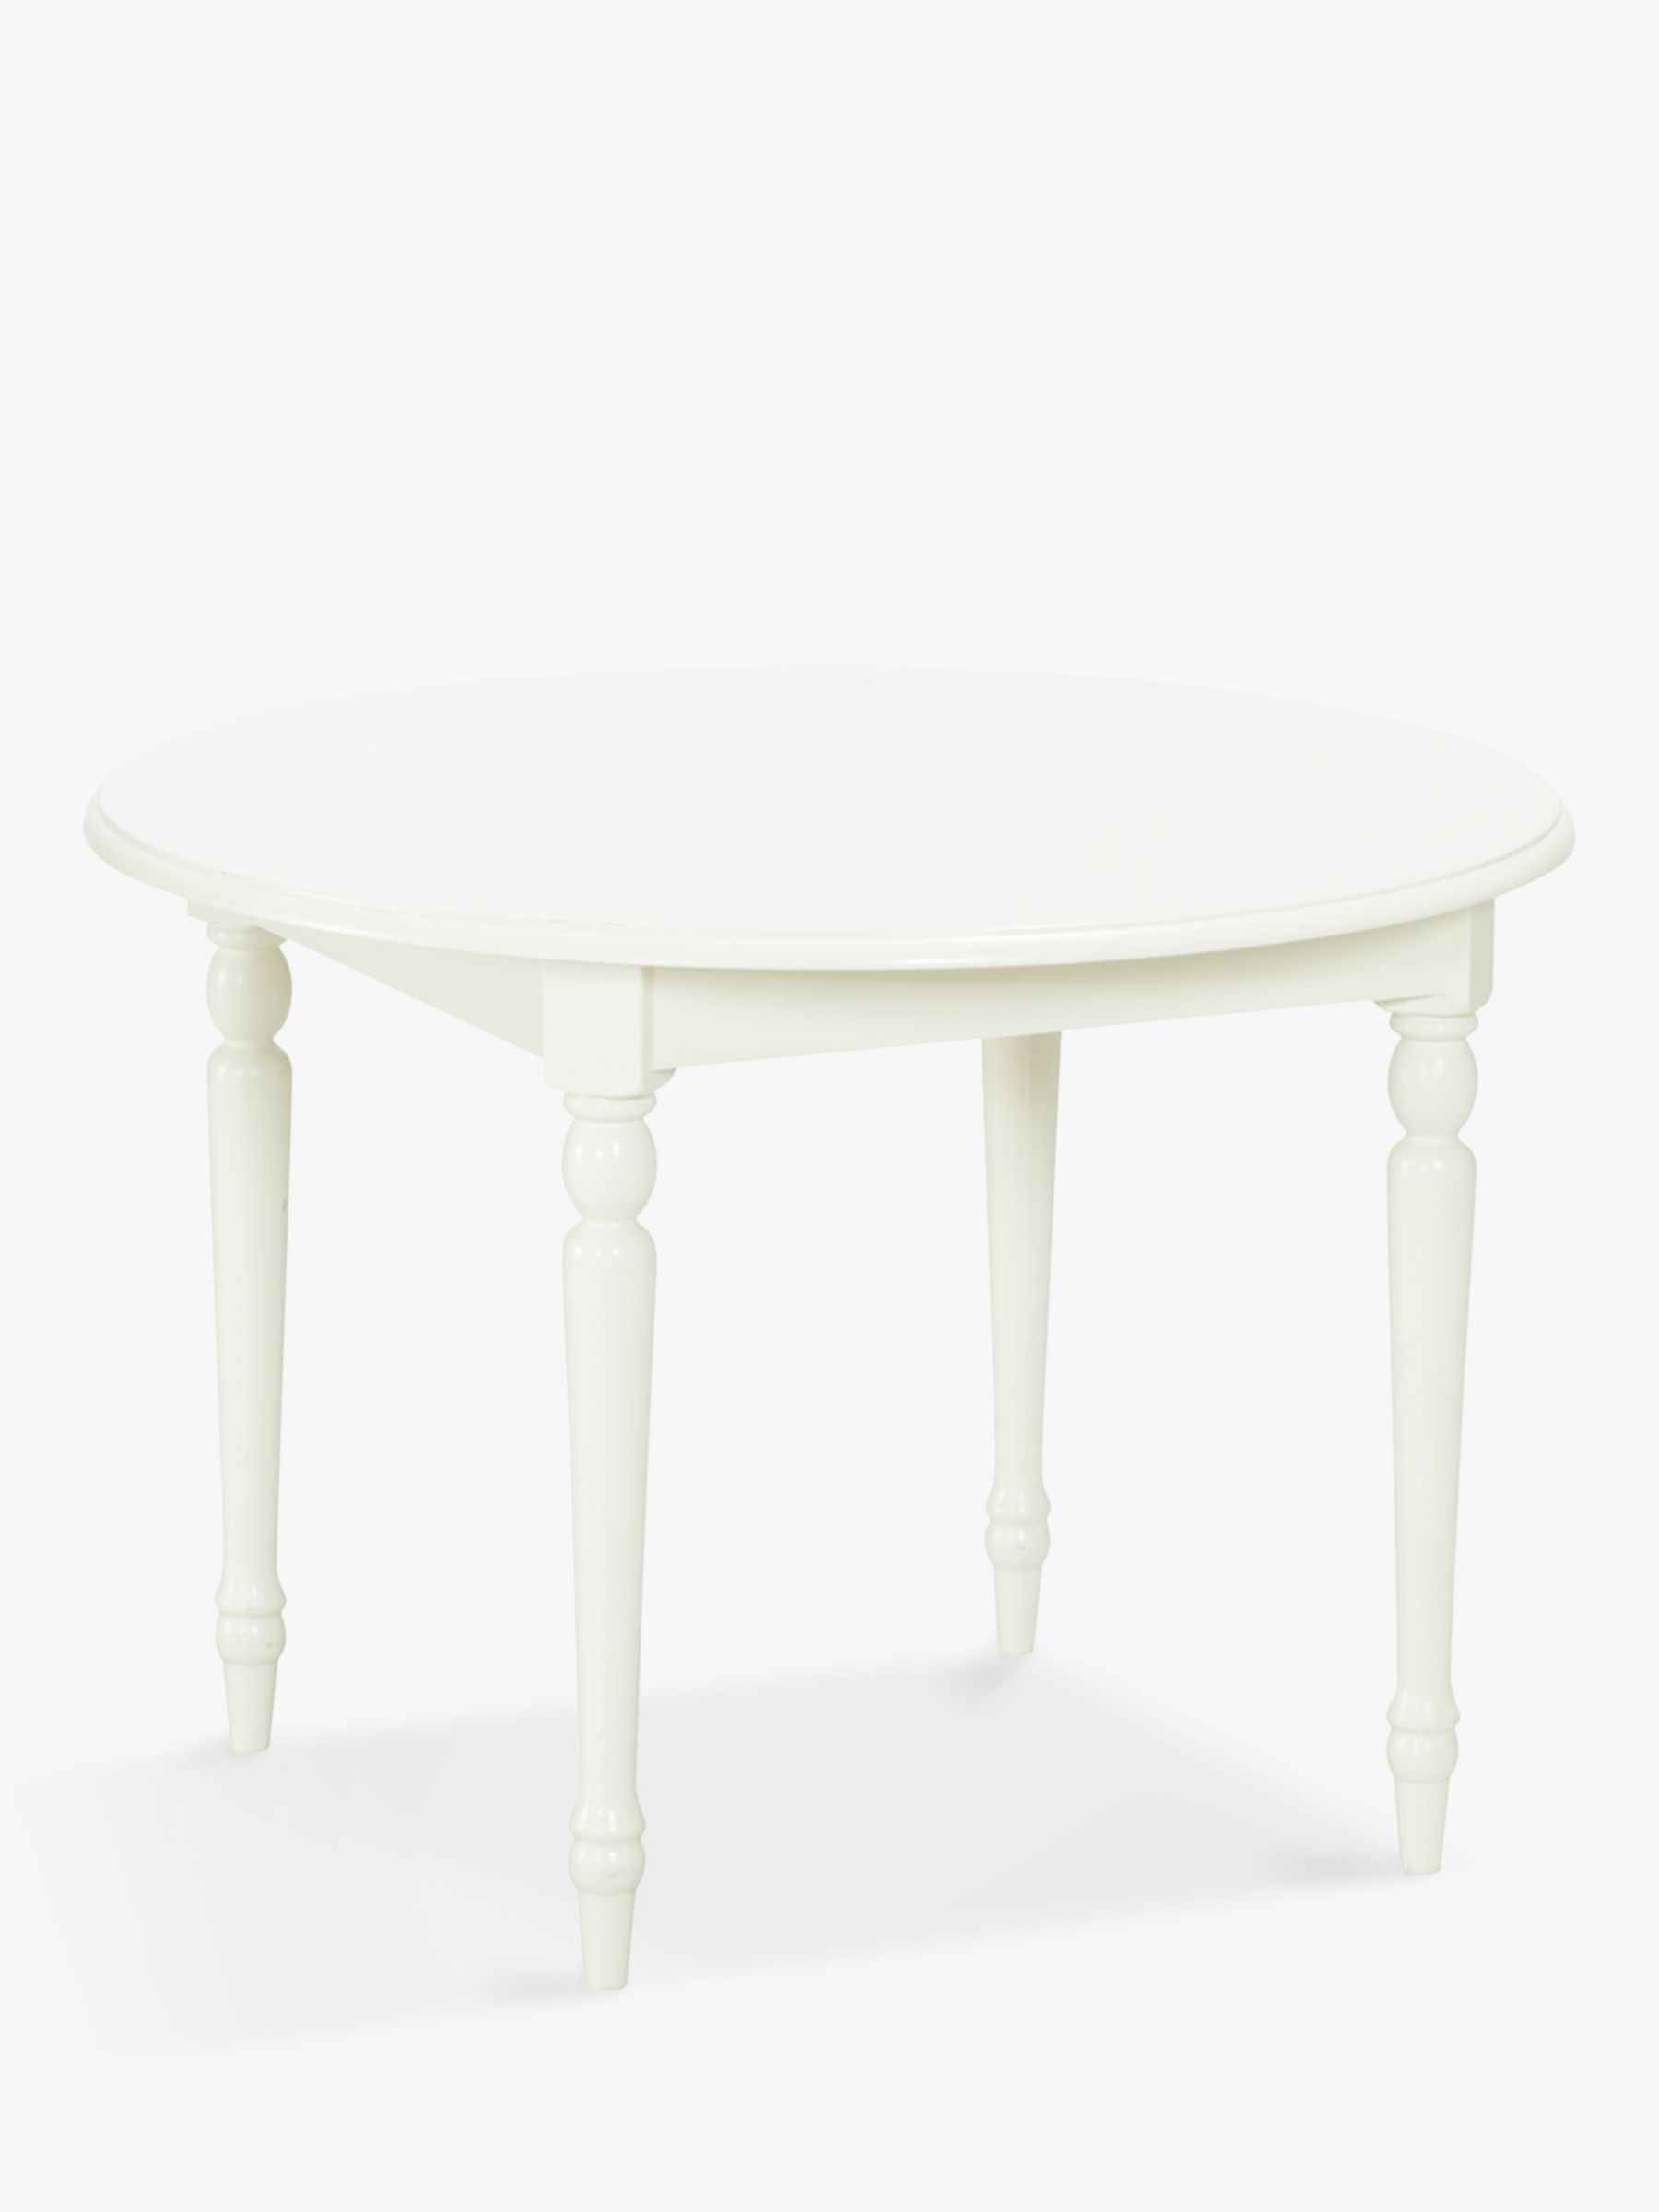 Image of Pottery Barn Kids Finley Play Table Vintage White